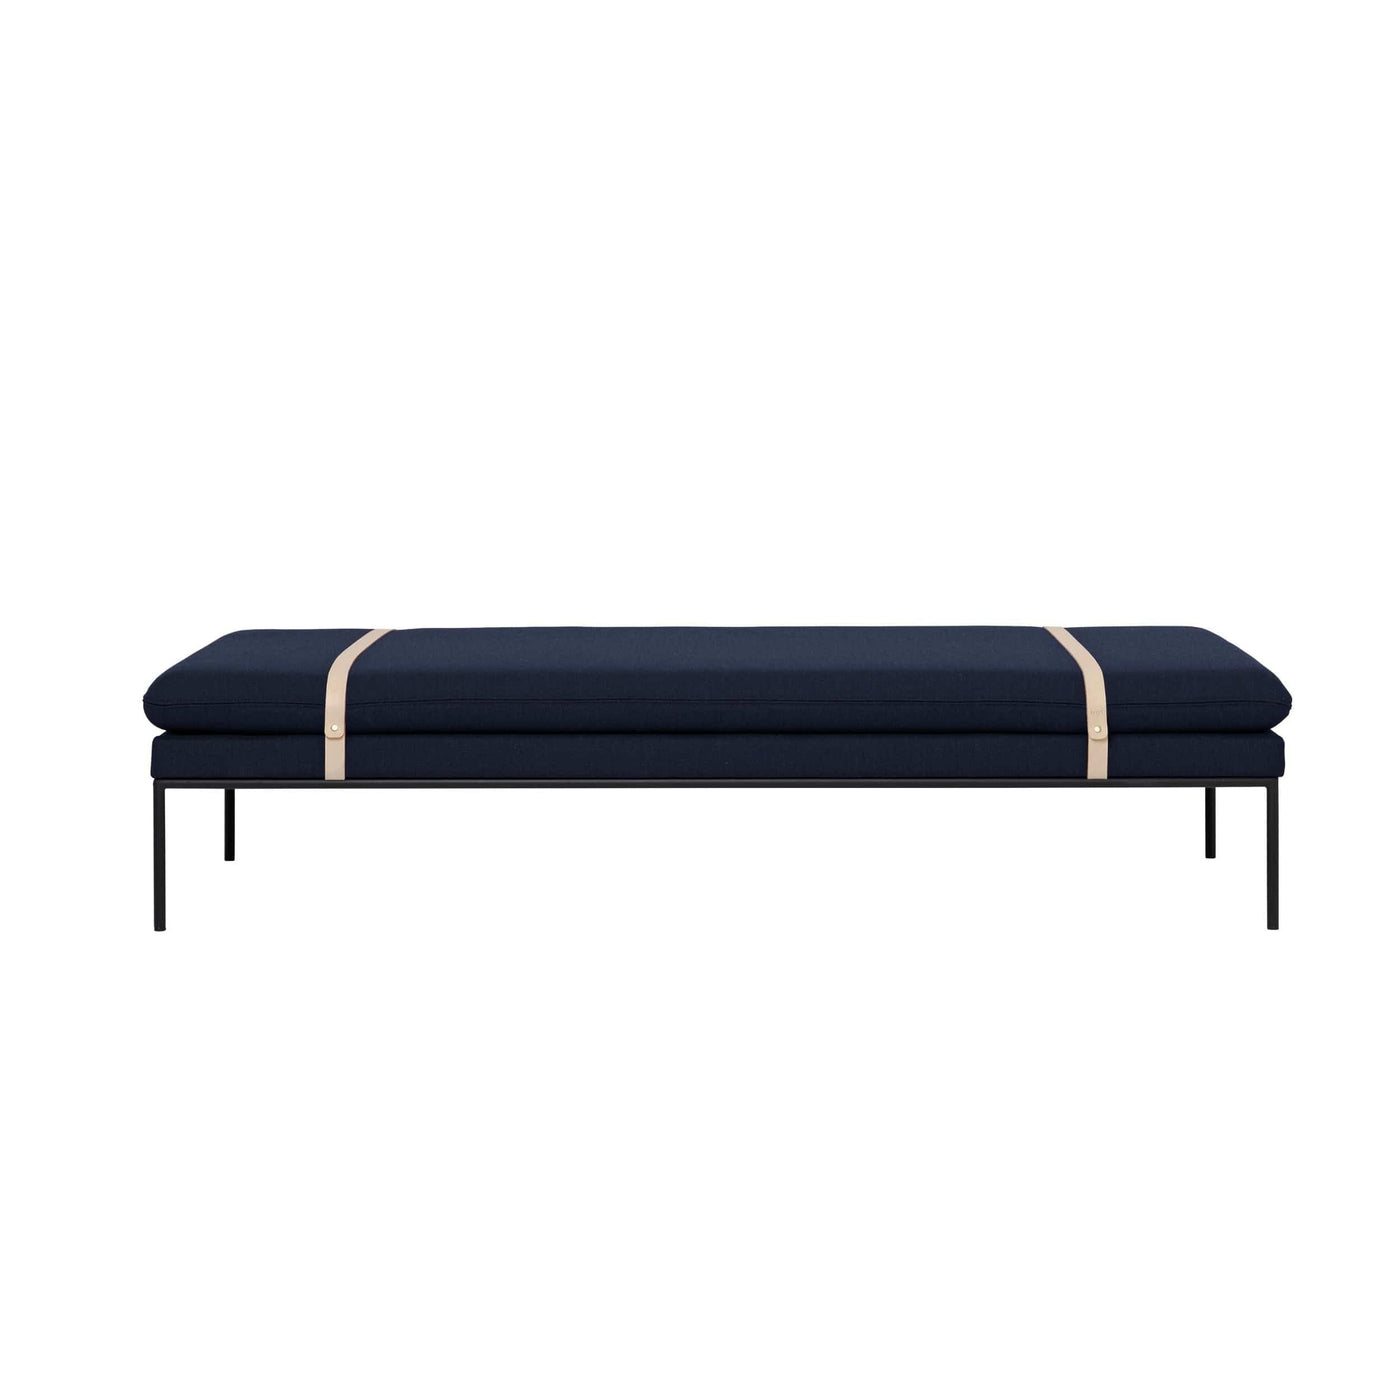 Ferm Living Turn Daybed in Fiord by Kvadrat dark blue fabric and harness straps. Made to order from someday designs.  #colour_dark-blue-fiord-by-kvadrat